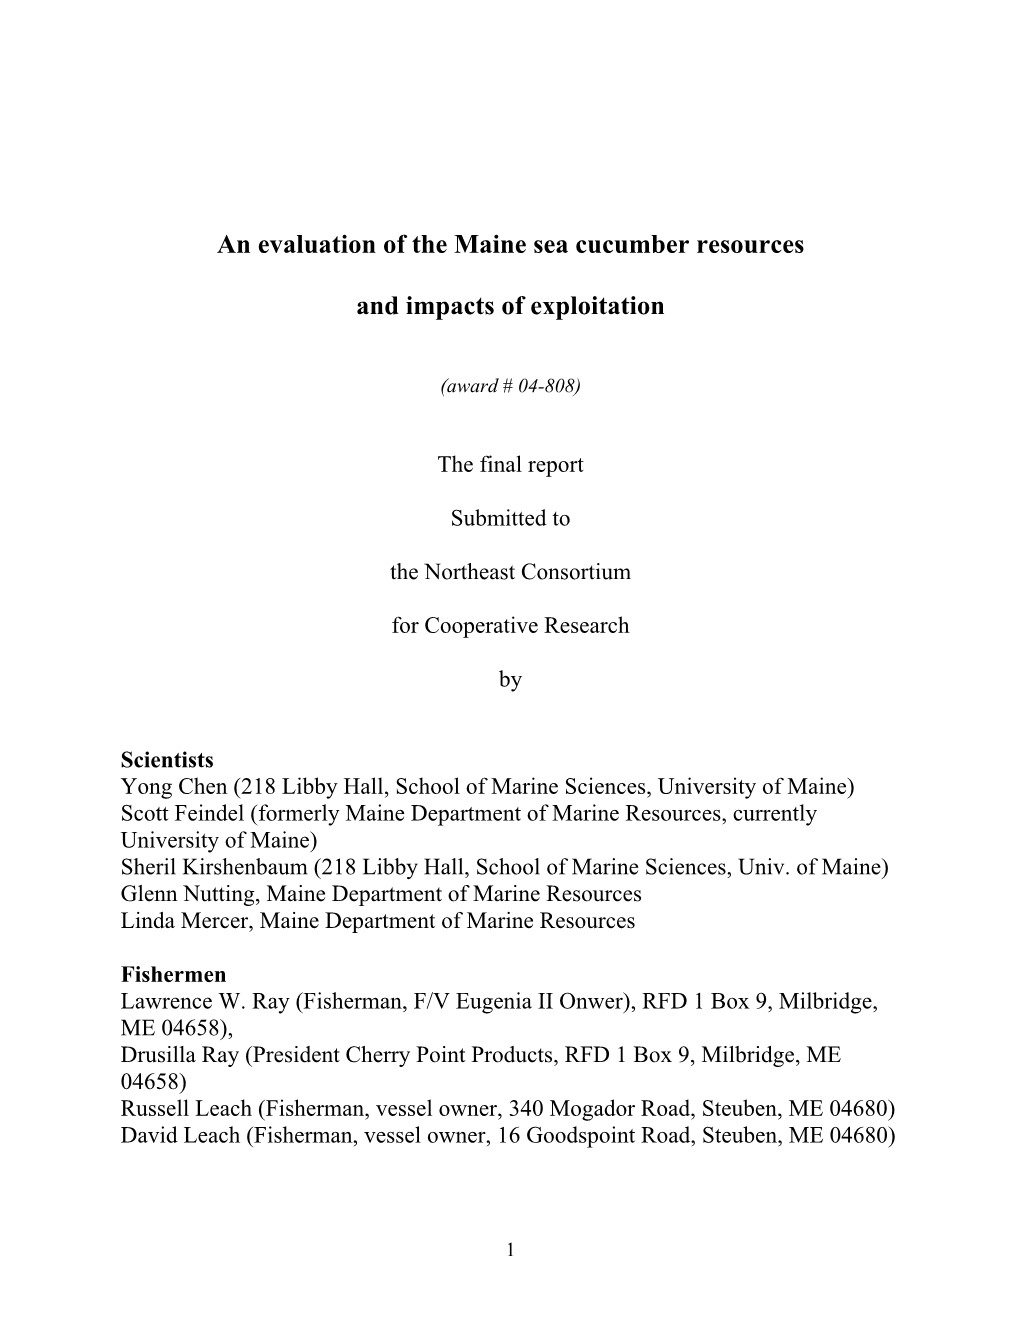 An Evaluation of the Maine Sea Cucumber Resources and Impacts Of